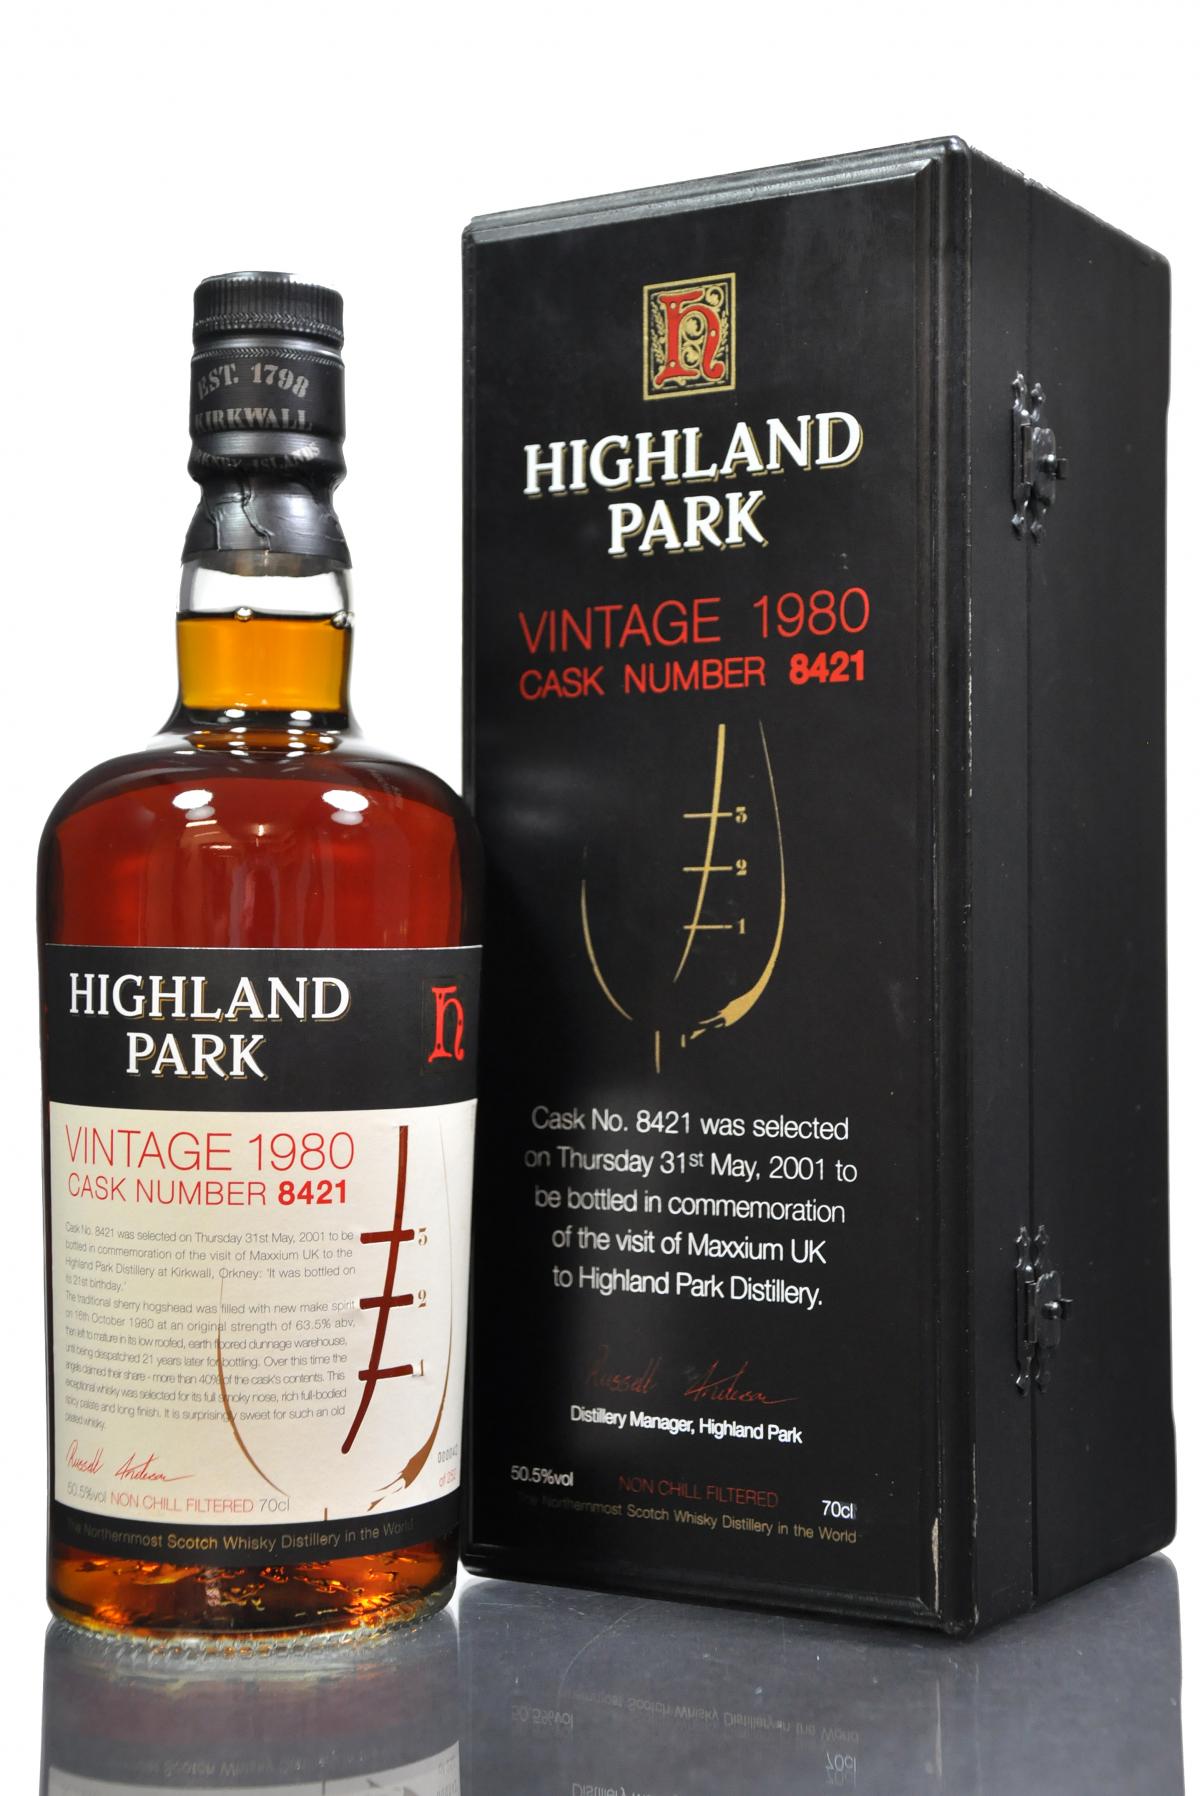 Highland Park 1980-2001 - 21 Year Old - Single Cask 8421 - Maxxium UK Visit Exclusive